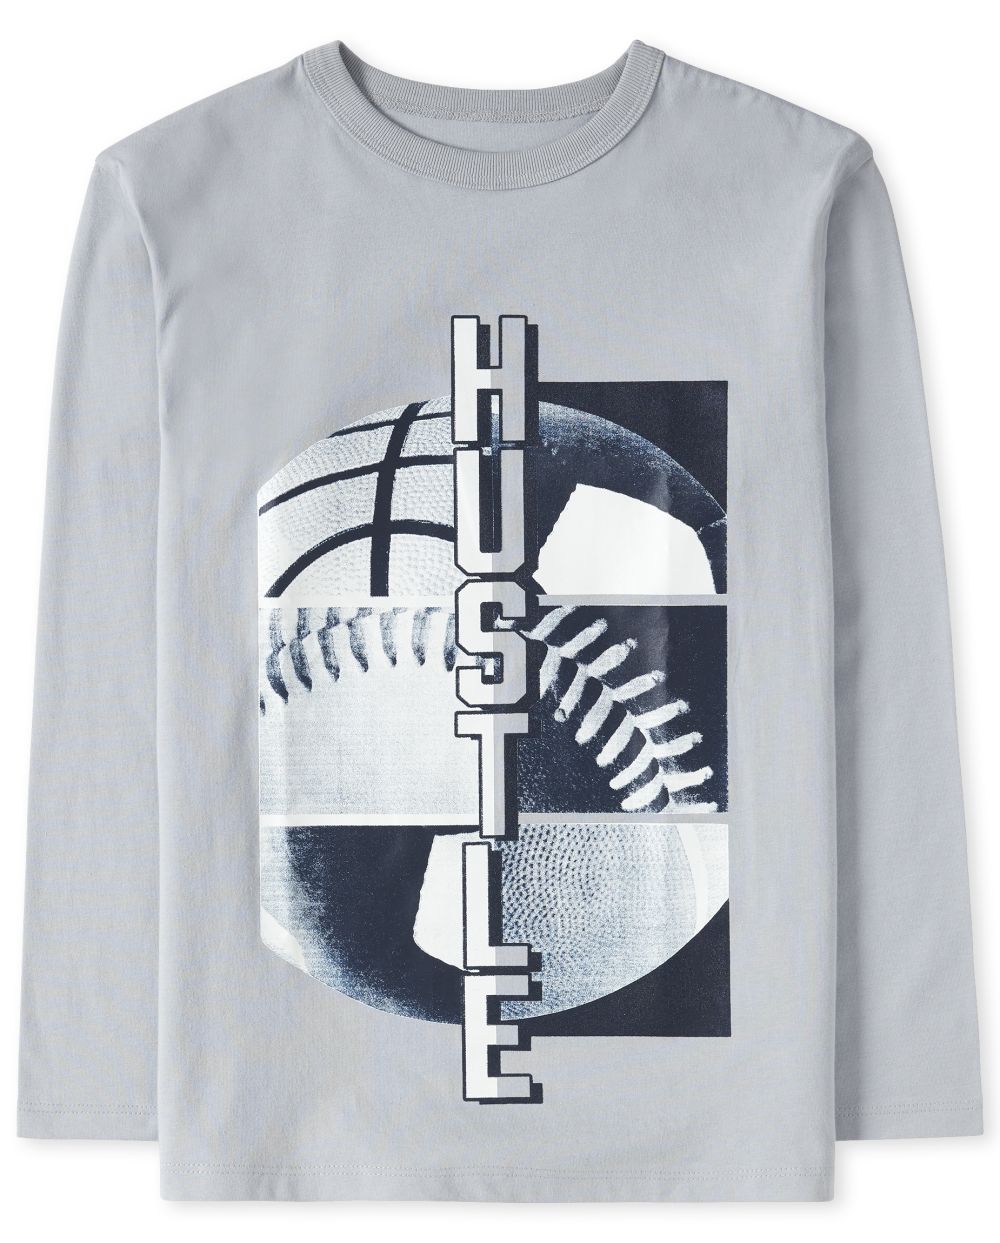 

s Boys Hustle Sports Graphic Tee - Gray T-Shirt - The Children's Place